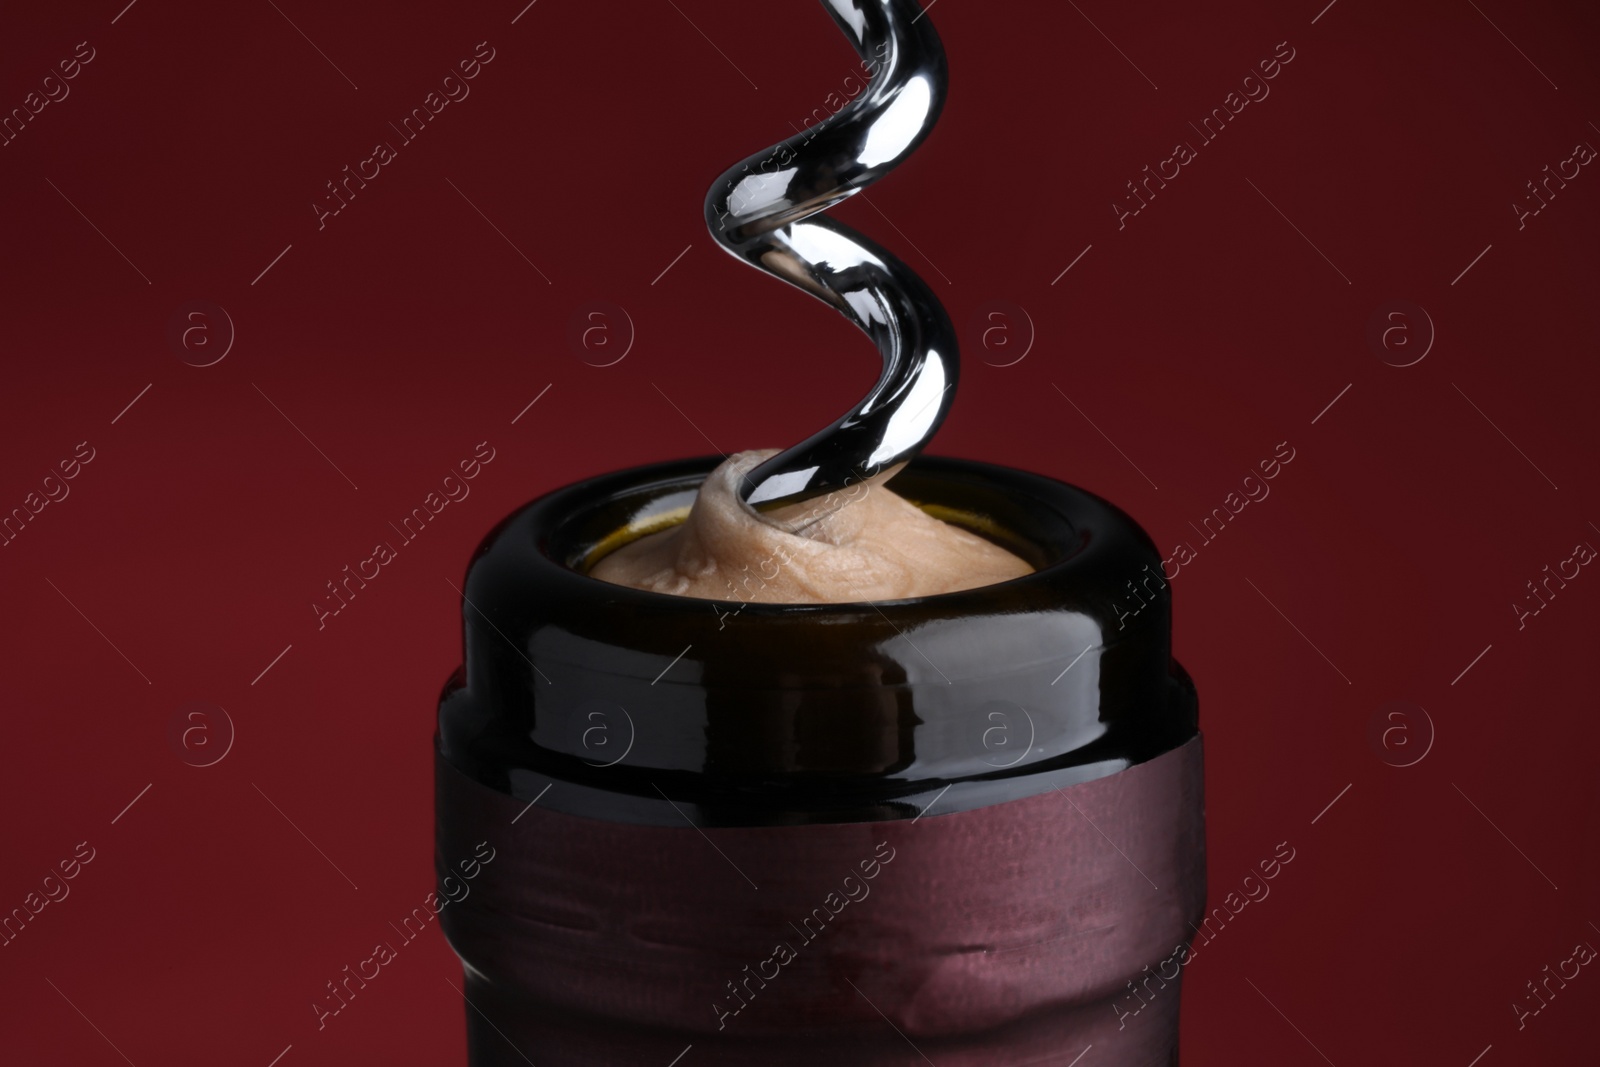 Photo of Opening bottle of wine with corkscrew on burgundy background, closeup